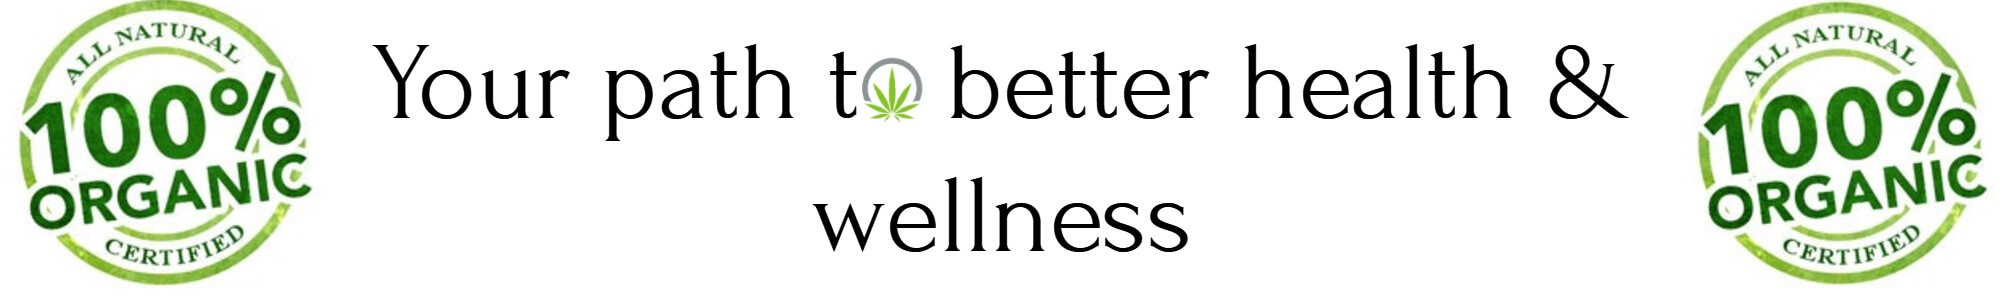 CBD based products have lots of health benefits